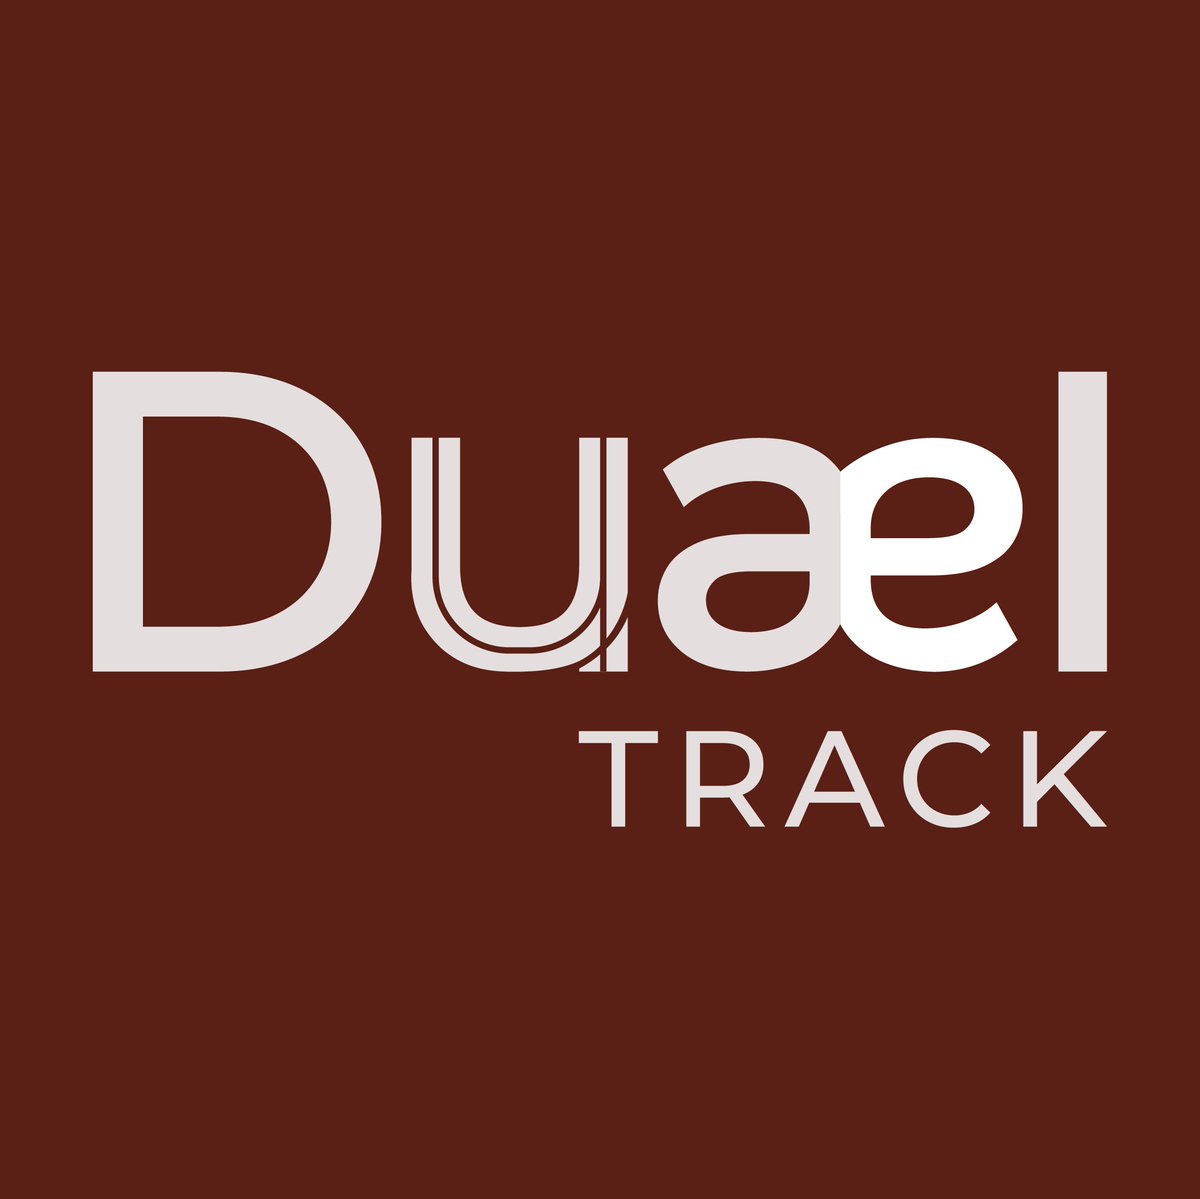 Duæl is the new brand of 1-on-1 running competitions. Dual meets. The modern duel. Duæl Track. Creating a new sport....that already exists. Stay tuned for news about our first event 👀 duaeltrack.com